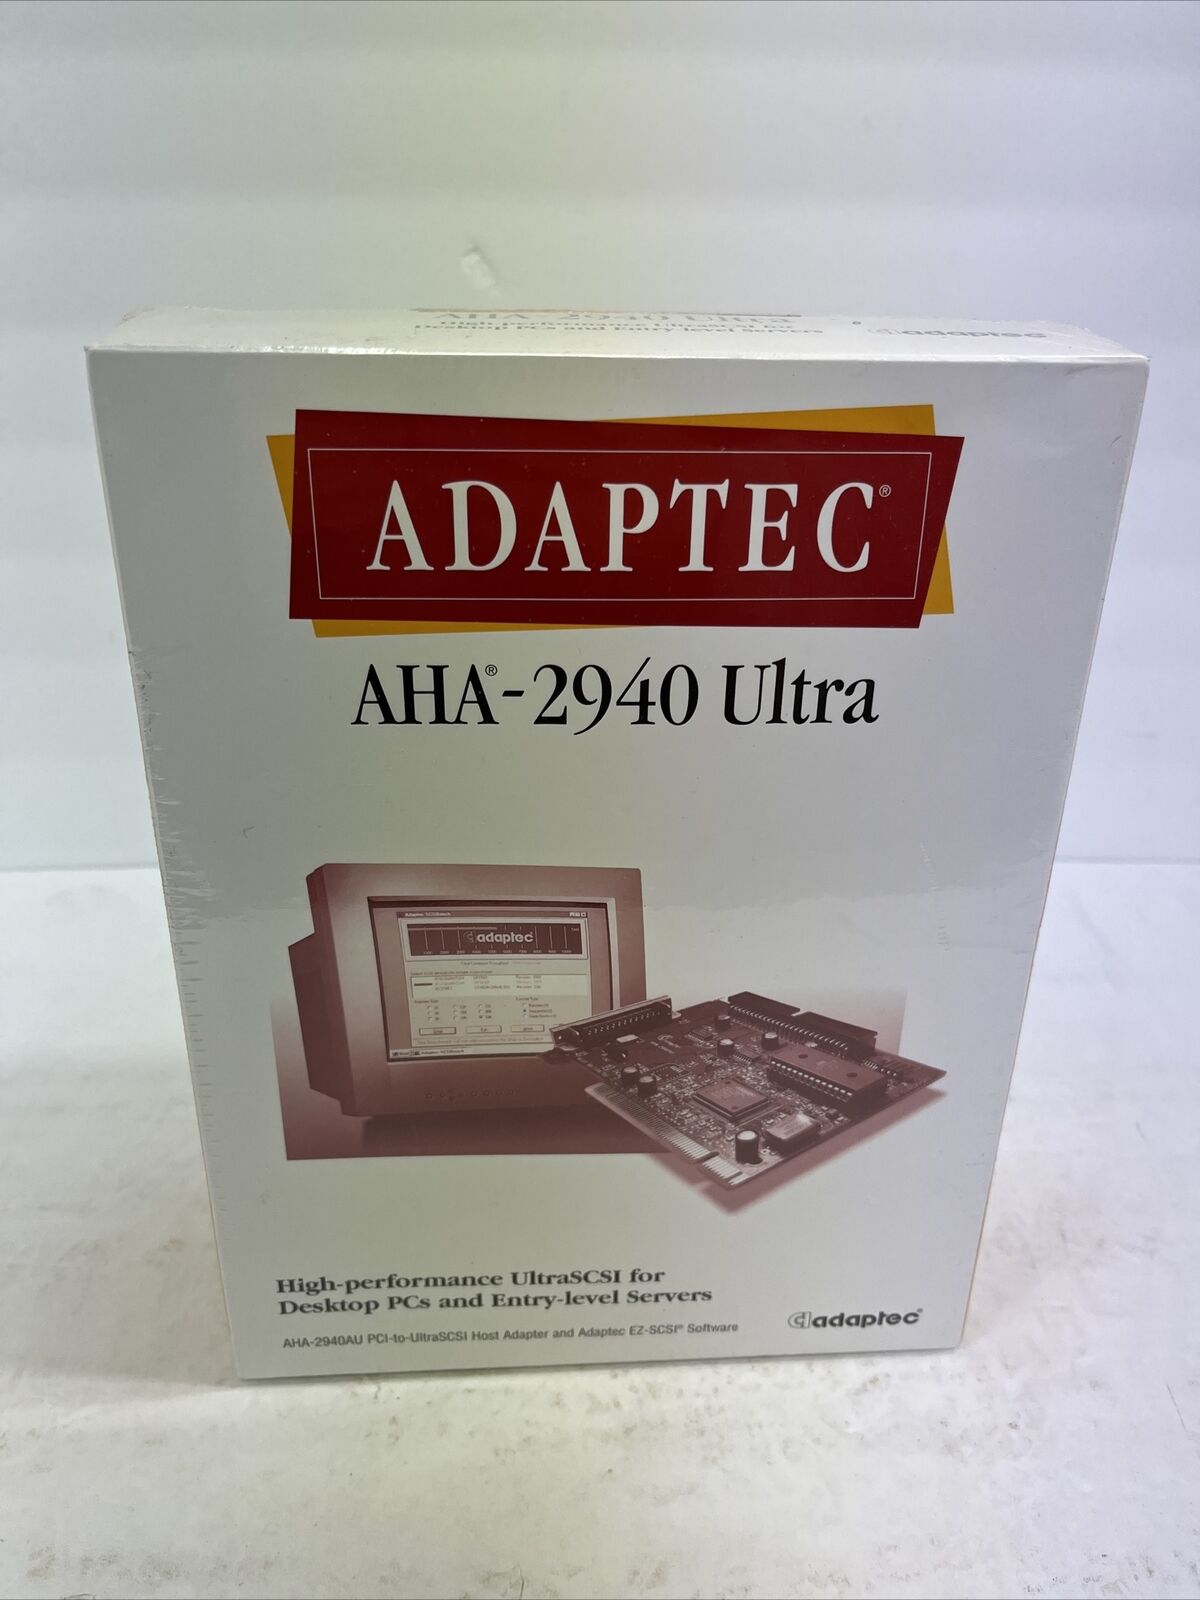 Adaptec AHA-2940 Ultra High-Performance PCI to Ultra SCSI Host Adapter - NEW